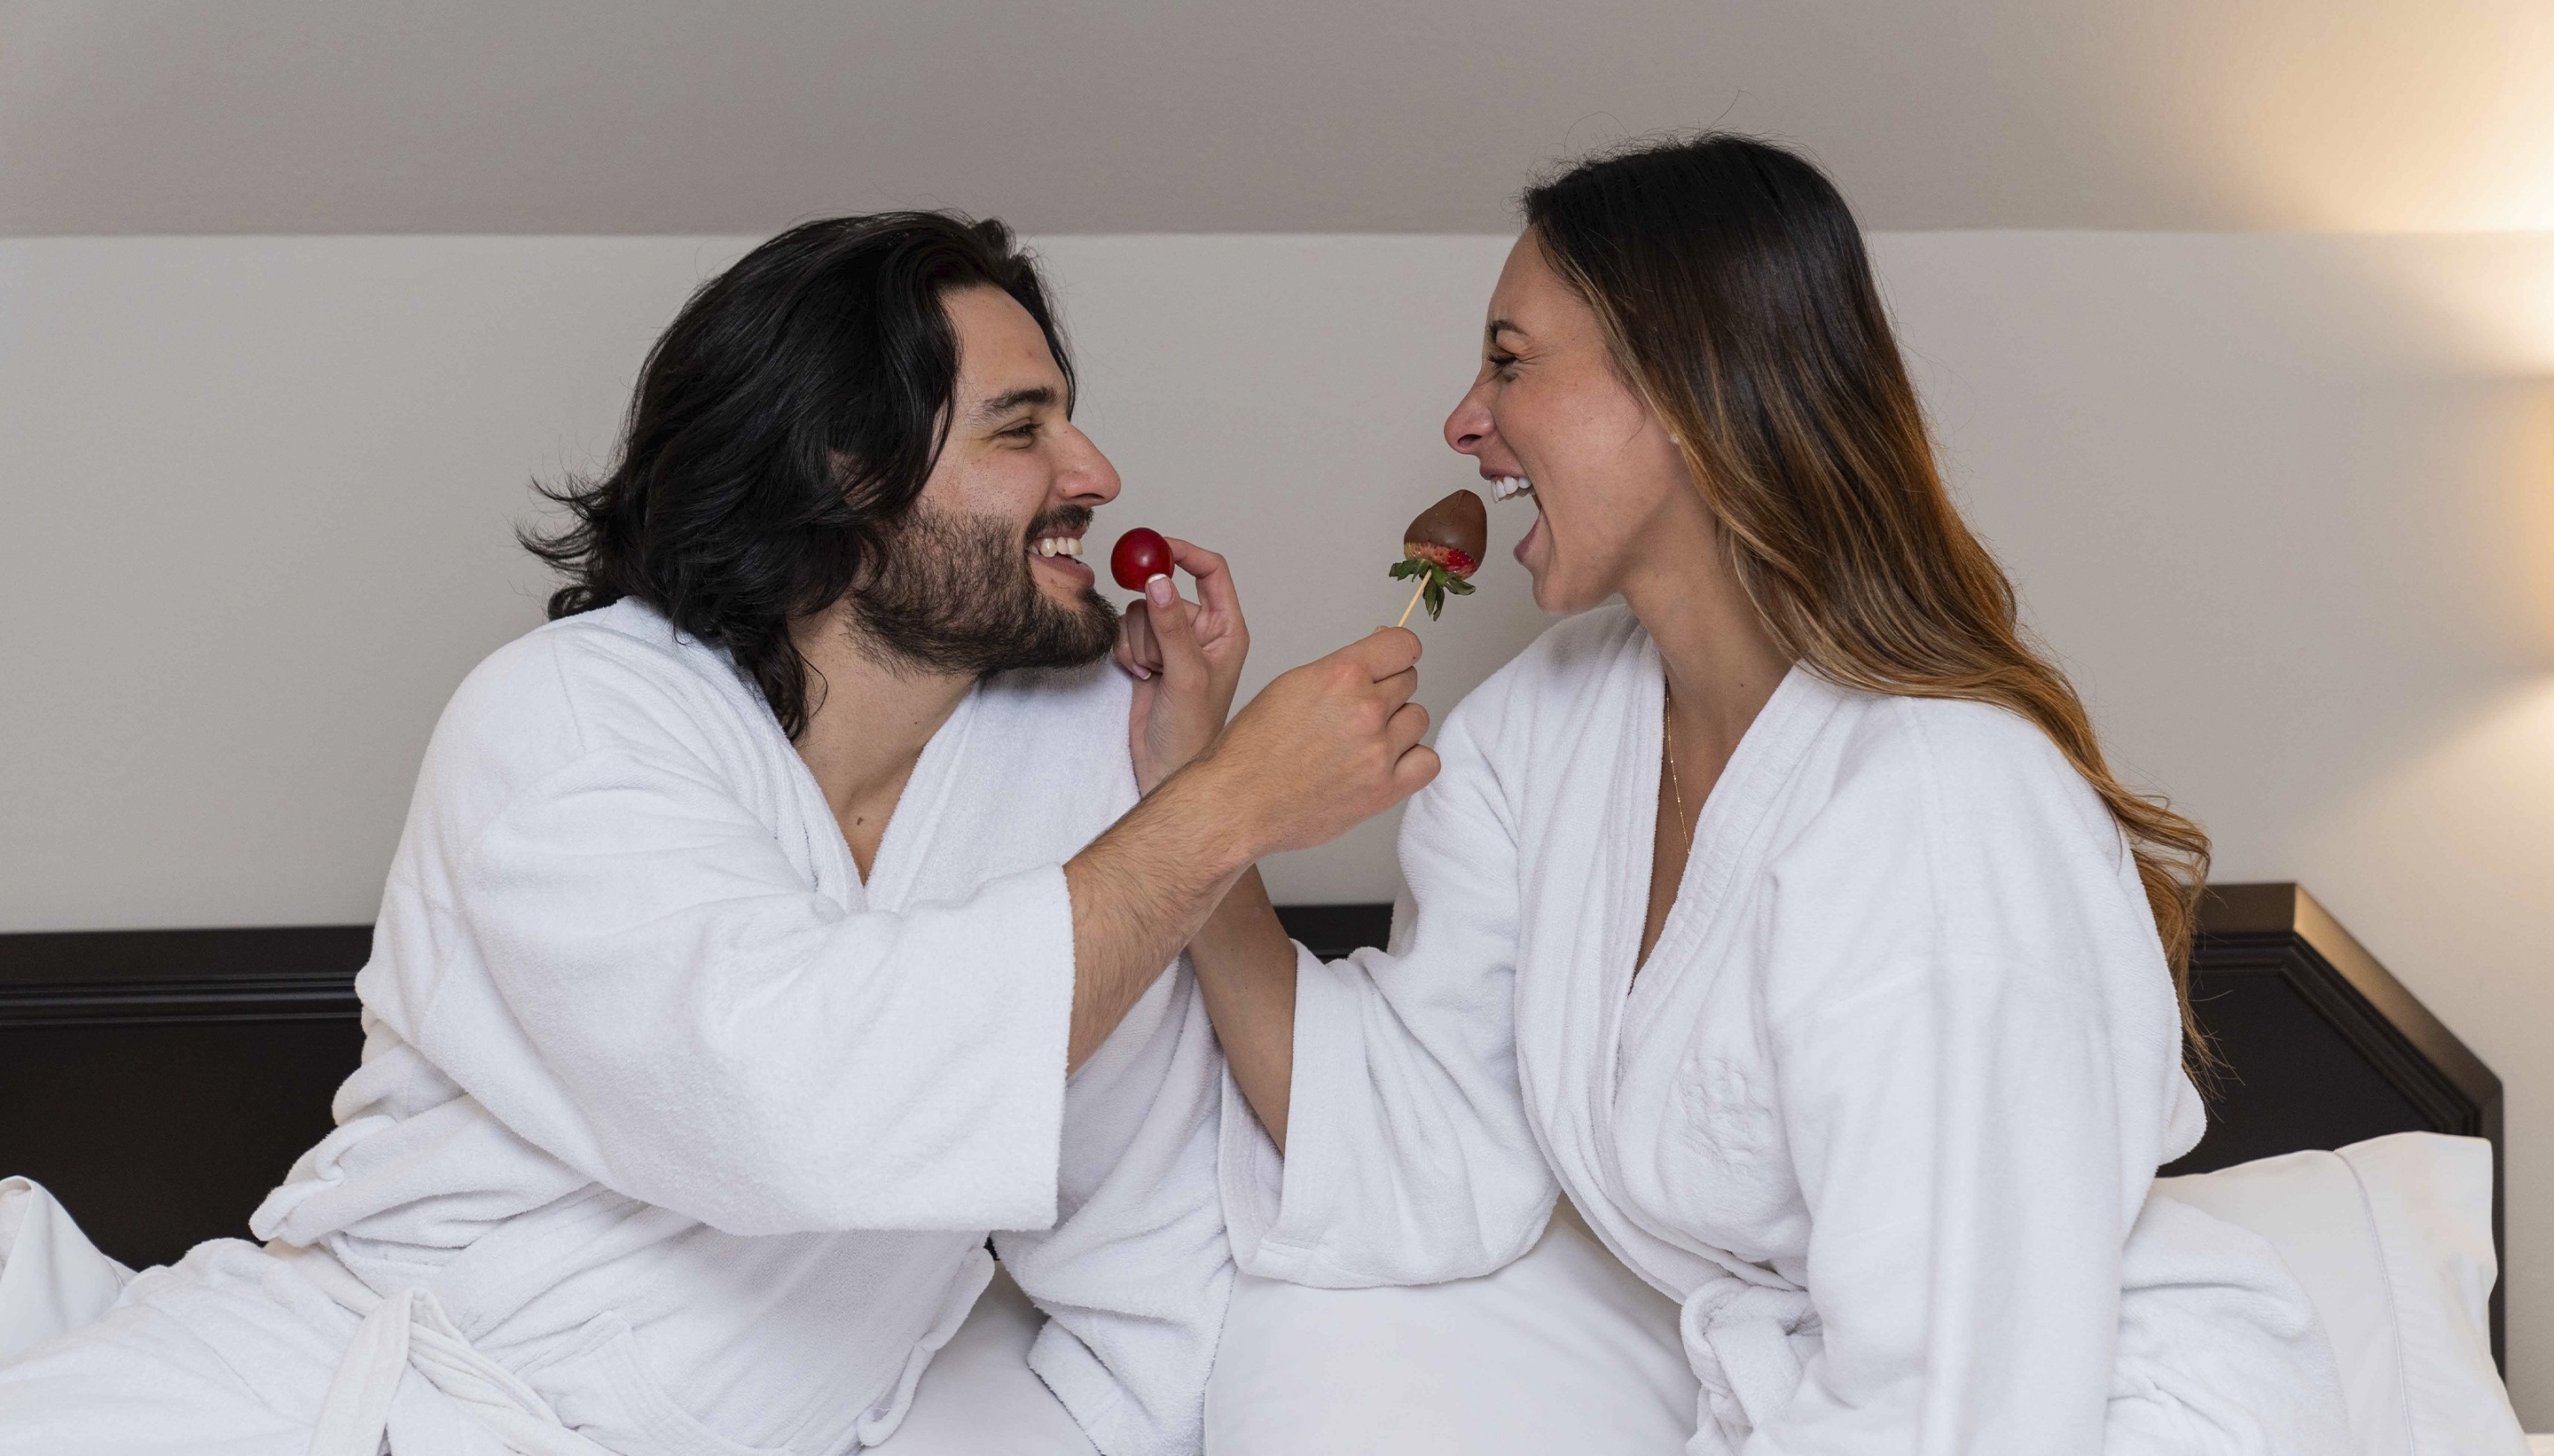 a man is feeding a woman a chocolate covered strawberry